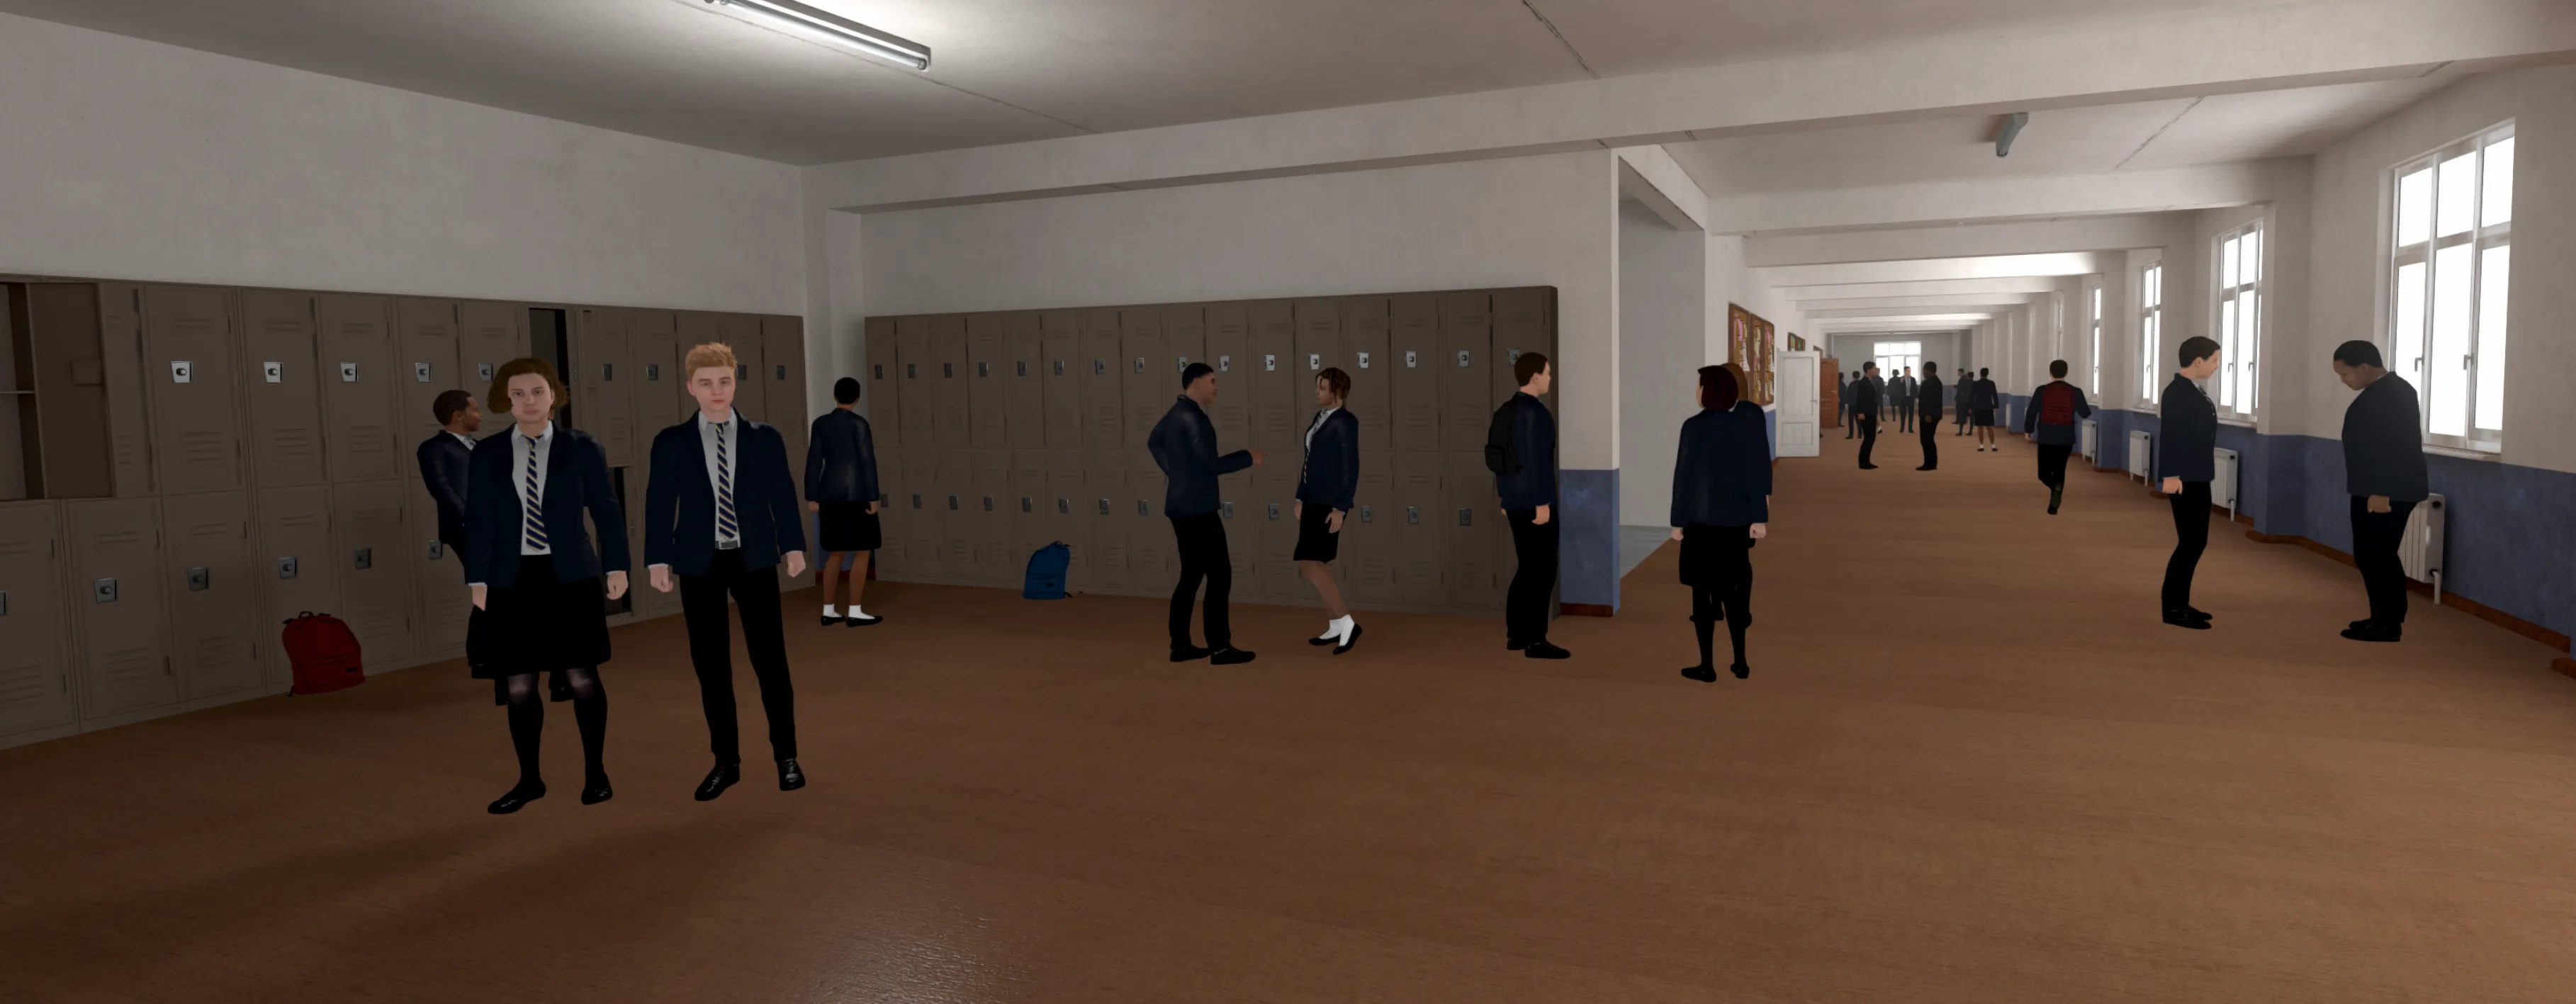 By the school lockers and looking down a corridor busy with children